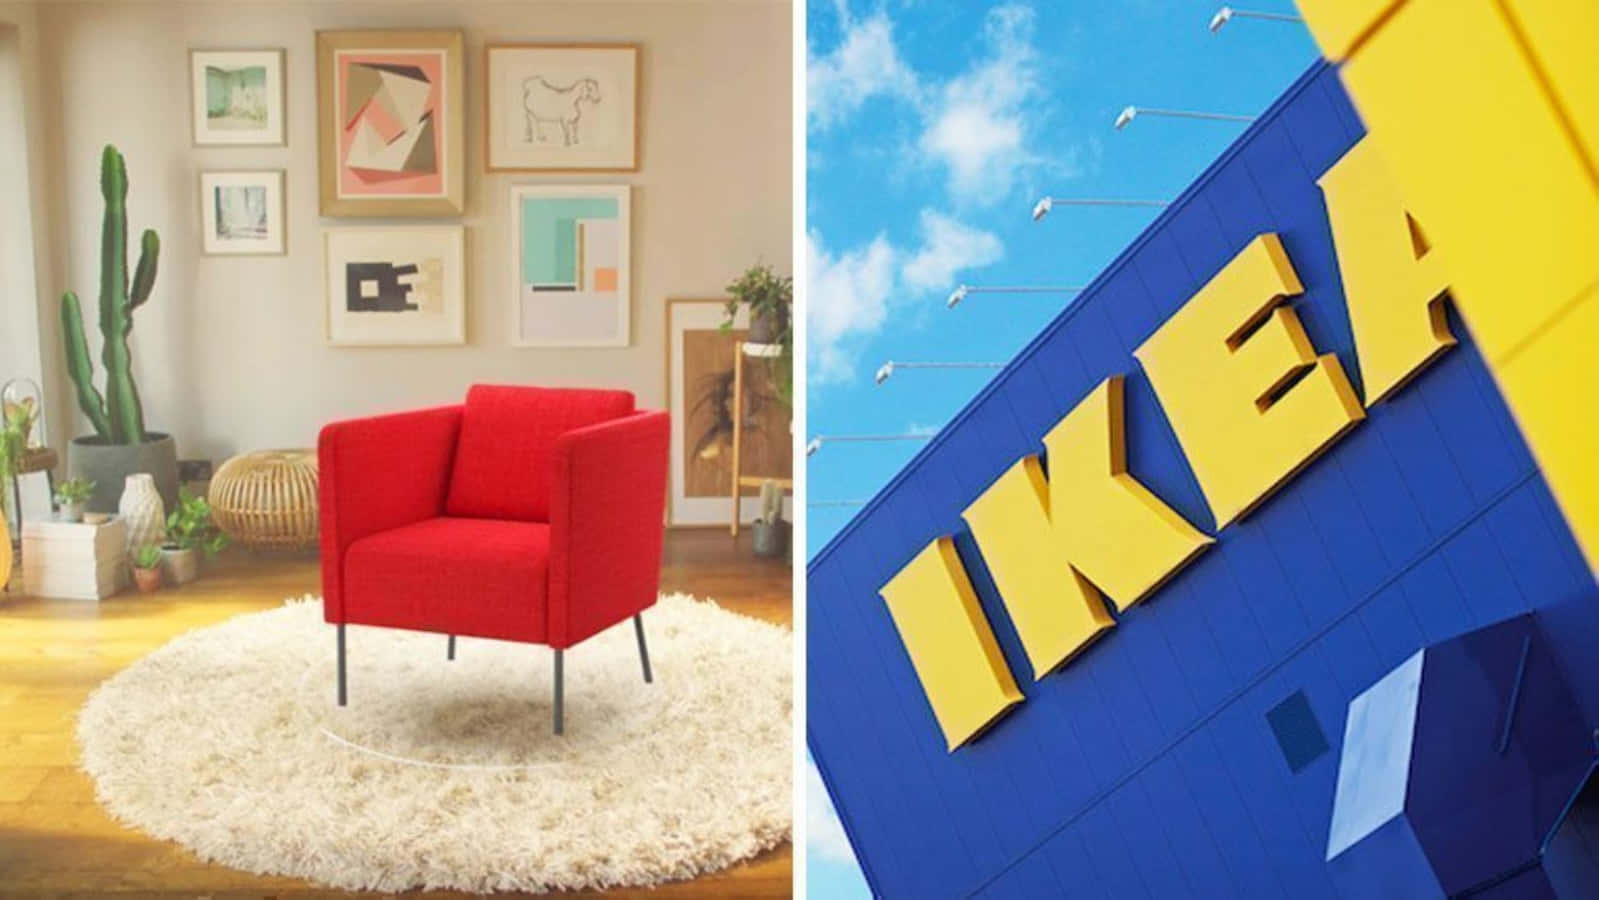 Get organised with the help of IKEA!